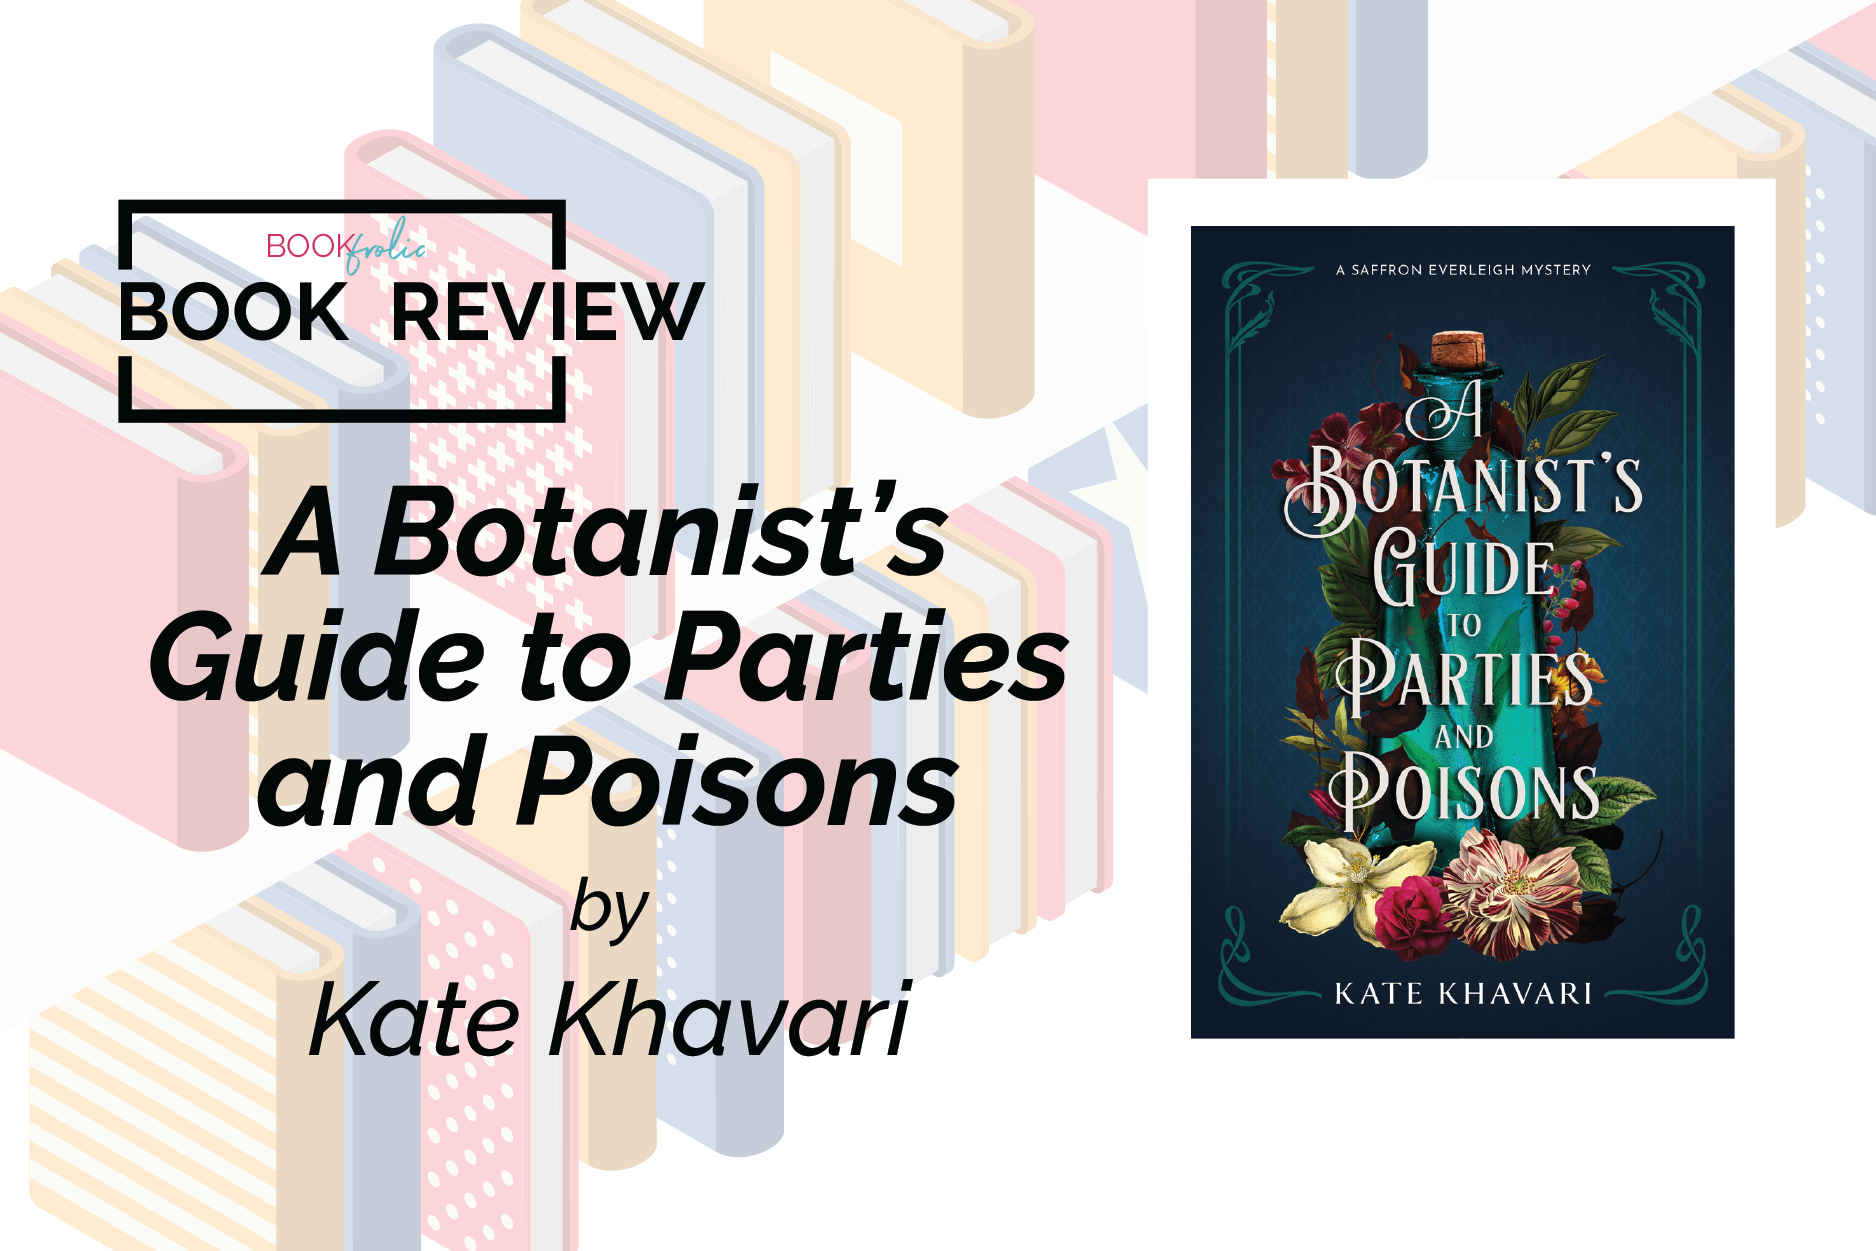 banner for book review of A Botanist's Guide to Parties and Poisons by Kate Khavari